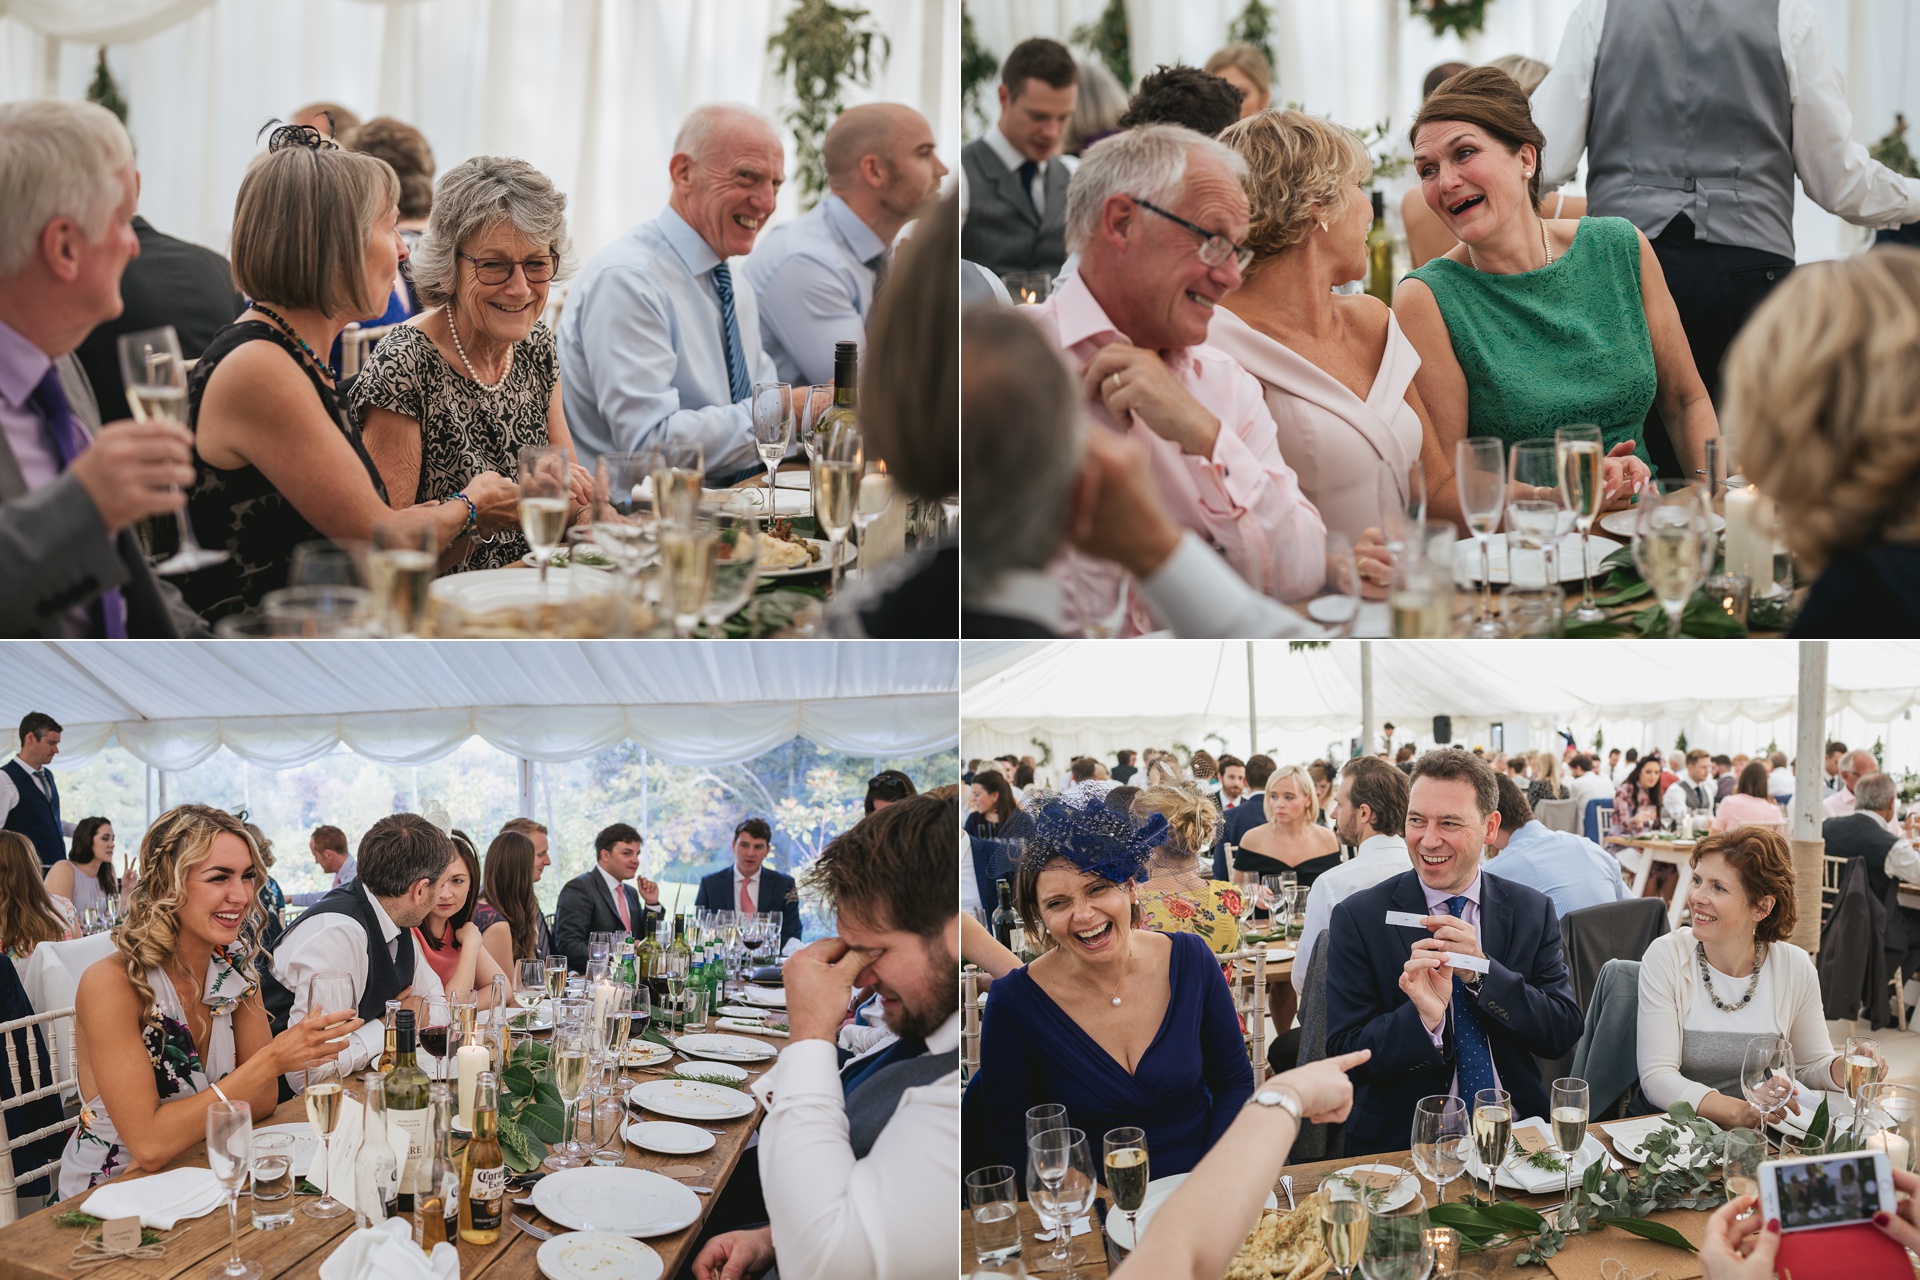 Wedding guests laughing inside a marquee